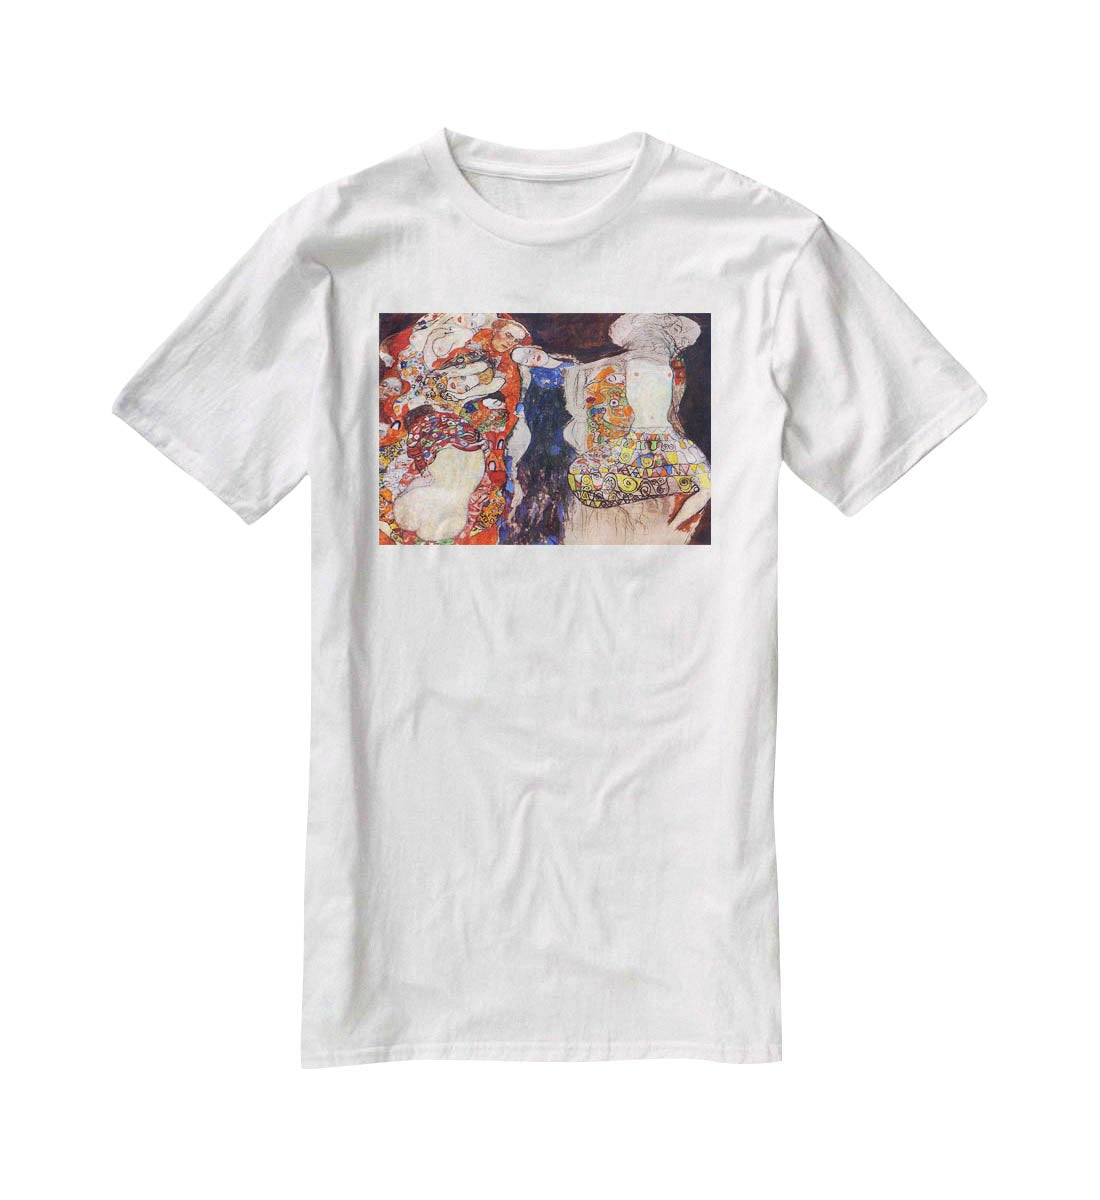 adorn the bride with veil and wreath by Klimt T-Shirt - Canvas Art Rocks - 5